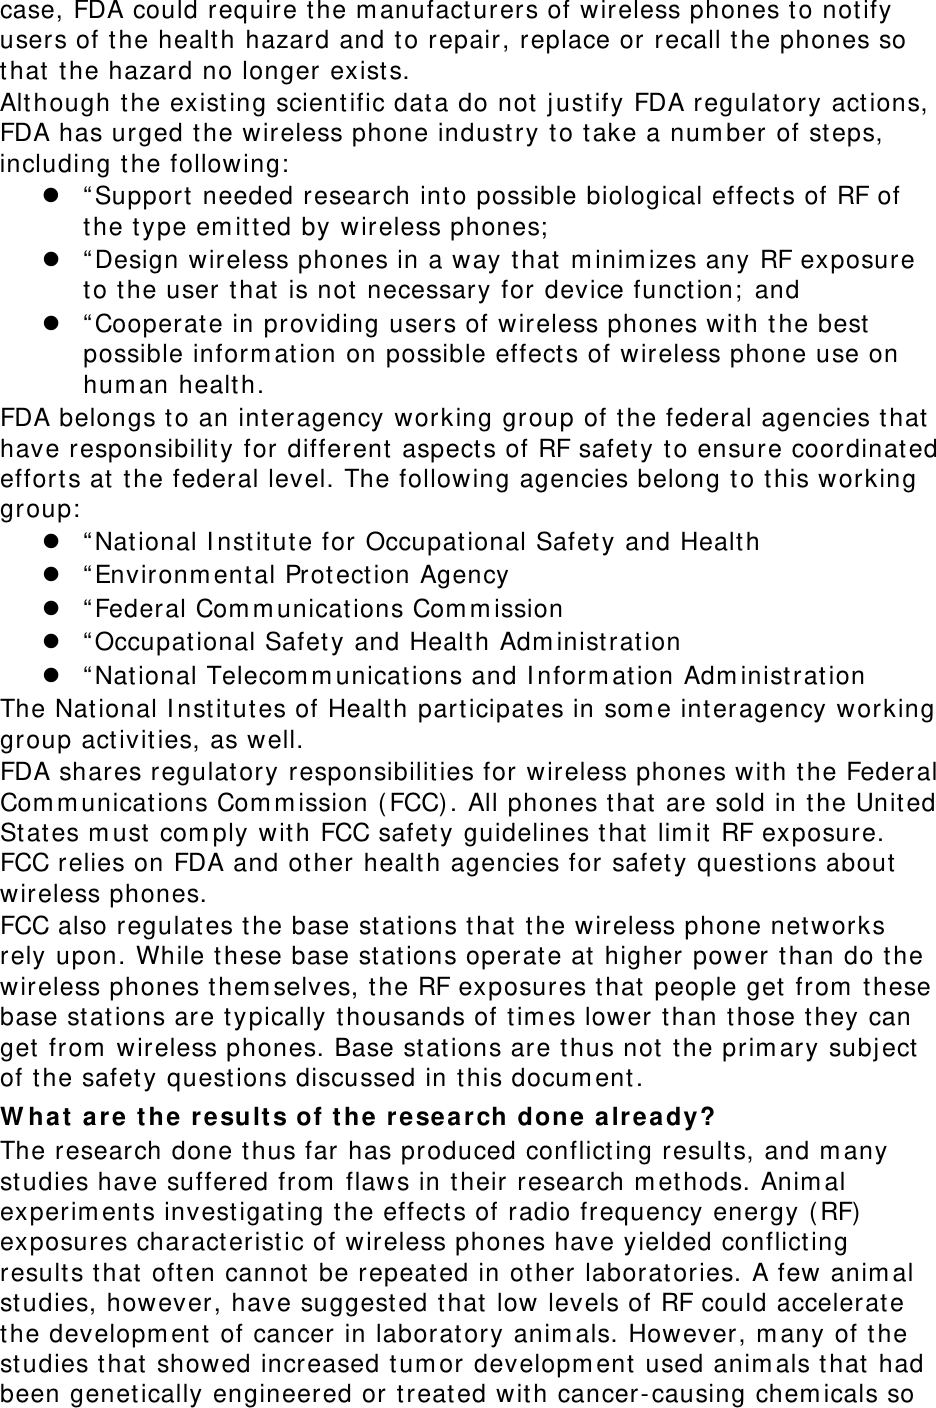 case, FDA could require t he m anufact ur ers of wireless phones to not ify users of the healt h hazard and to repair, replace or recall t he phones so that  the hazard no longer exist s. Alt hough t he exist ing scient ific dat a do not j ustify FDA regulat ory act ions, FDA has urged t he wireless phone indust ry to t ake a num ber of st eps, including t he following:   “ Support  needed research int o possible biological effects of RF of the t ype em itted by wireless phones;   “ Design wireless phones in a way t hat  m inim izes any RF exposure to t he user t hat  is not necessary for device function;  and  “ Cooperat e in providing users of wireless phones wit h t he best possible inform at ion on possible effect s of wireless phone use on hum an health. FDA belongs t o an int eragency working group of t he federal agencies that  have responsibilit y for different aspect s of RF safet y t o ensure coordinat ed effort s at the federal level. The following agencies belong t o this working group:   “ Nat ional I nst it ut e for Occupational Safet y and Healt h  “ Environm ental Prot ect ion Agency  “ Federal Com m unicat ions Com m ission  “ Occupational Safet y and Health Adm inist rat ion  “ Nat ional Telecom m unicat ions and I nform at ion Adm inistrat ion The National I nst it utes of Healt h par ticipates in som e interagency working group act ivit ies, as well. FDA shares regulat ory responsibilit ies for wireless phones wit h t he Federal Com m unicat ions Com m ission ( FCC). All phones that  are sold in t he Unit ed St at es m ust  com ply wit h FCC safet y guidelines t hat  lim it RF exposure. FCC relies on FDA and ot her healt h agencies for safet y quest ions about  wireless phones. FCC also regulates t he base st at ions t hat  t he wireless phone net works rely upon. While t hese base st at ions operat e at higher power t han do the wireless phones t hem selves, t he RF exposures that  people get  from  these base stat ions are t ypically thousands of t im es lower t han those they can get  from  wireless phones. Base st at ions are t hus not  the prim ary subj ect  of t he safet y quest ions discussed in t his docum ent . W ha t  a r e  t he r esu lt s of t he re se a r ch  done a lr ea dy? The research done thus far has produced conflict ing result s, and m any studies have suffered from  flaws in t heir research m ethods. Anim al experim ents invest igating t he effect s of radio frequency energy ( RF)  exposures charact erist ic of wireless phones have yielded conflict ing results t hat often cannot be repeat ed in ot her  laboratories. A few anim al studies, however, have suggest ed t hat  low levels of RF could accelerate the developm ent  of cancer in laborat ory anim als. However , m any of t he studies t hat showed increased t um or developm ent  used anim als t hat had been genetically engineered or t reated with cancer-causing chem icals so 